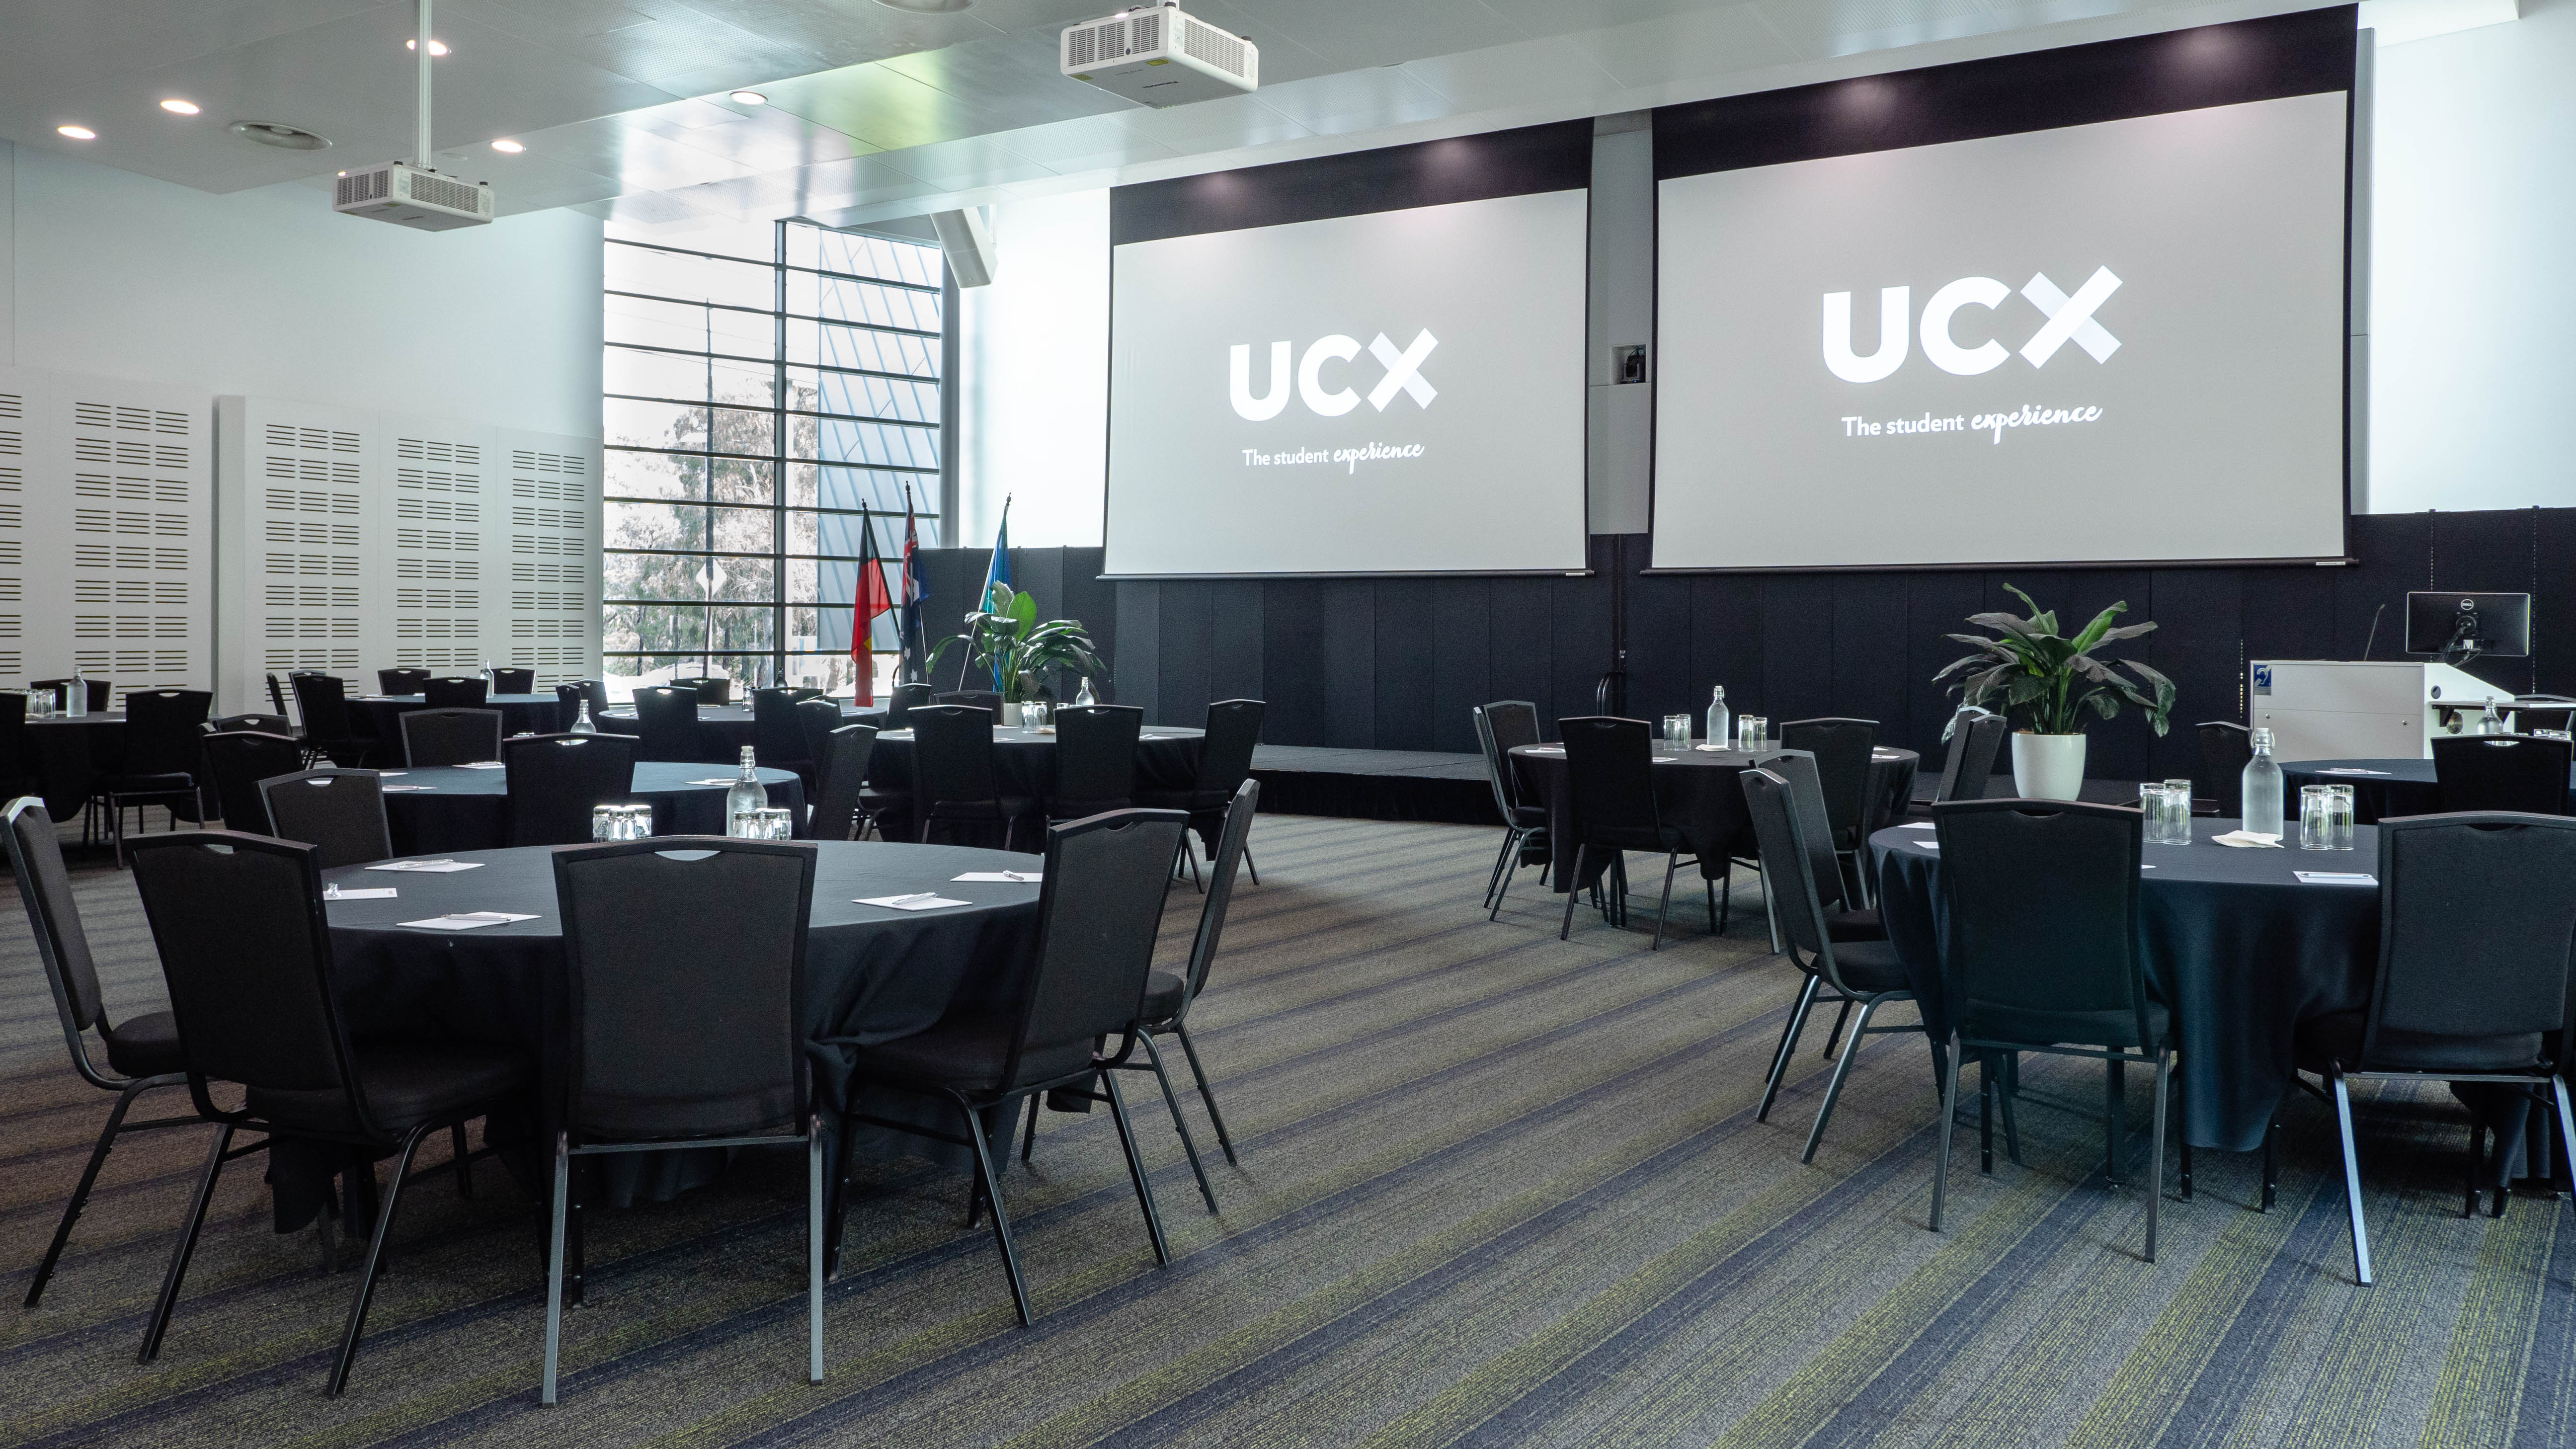 Multiple round tables with chairs around them in a large room. Each chair has a notepad and glass in front of it. The UCX logo is displayed on projector screens at the front of the room